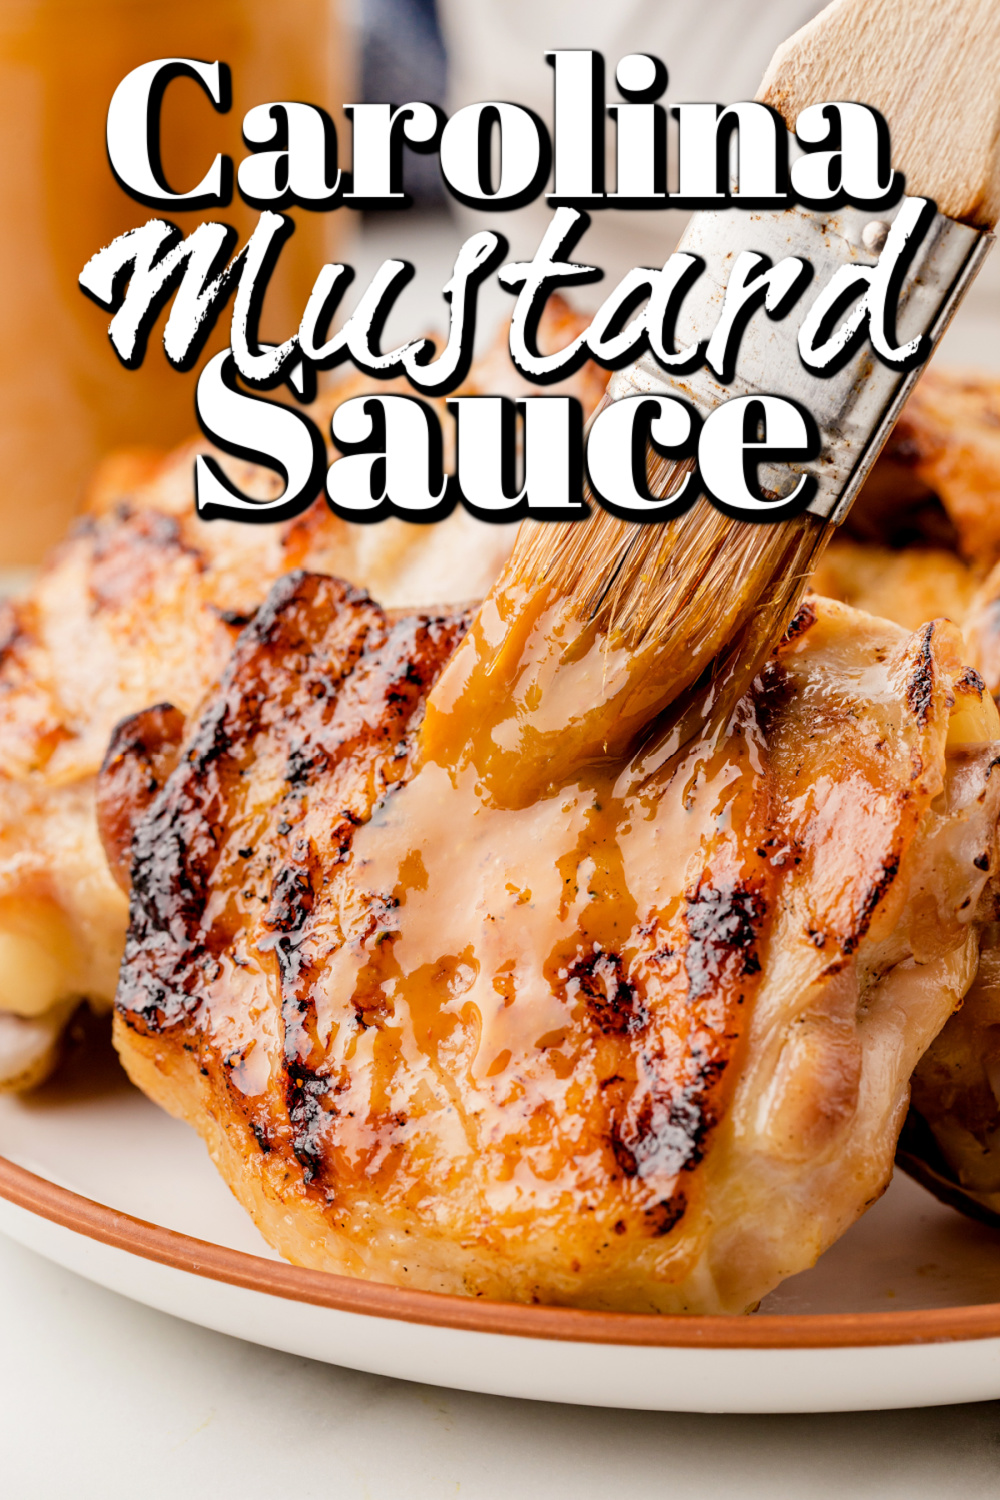 Bring a little taste of South Carolina to your BBQ with this amazing Carolina Mustard BBQ Sauce!